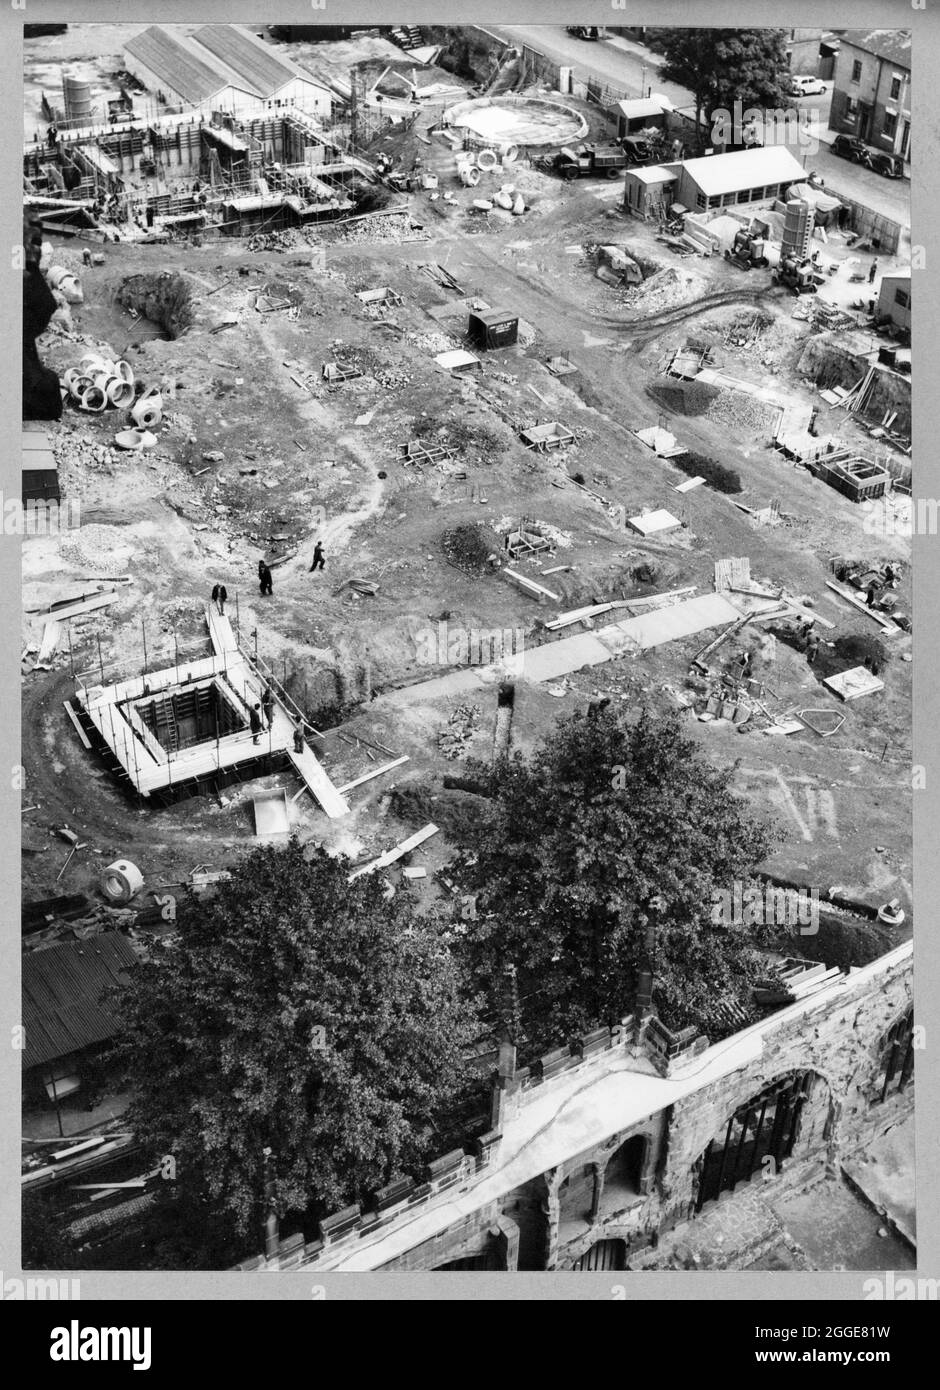 A view of the construction site of Coventry Cathedral taken from the spire of the old Coventry Cathedral, looking down on the original graveyard and the remains of the Old Priory Row which traversed the site from east to west. The photograph shows the construction of the new Coventry Cathedral, designed by Basil Spence in 1951 and constructed between the mid-1950s and 1962. It replaced the ruined Cathedral Church of St Michael which had been badly damaged by bombing in 1941. The caption below the photograph in the album reads &quot;... In the centre of the middle ground can be seen the constru Stock Photo